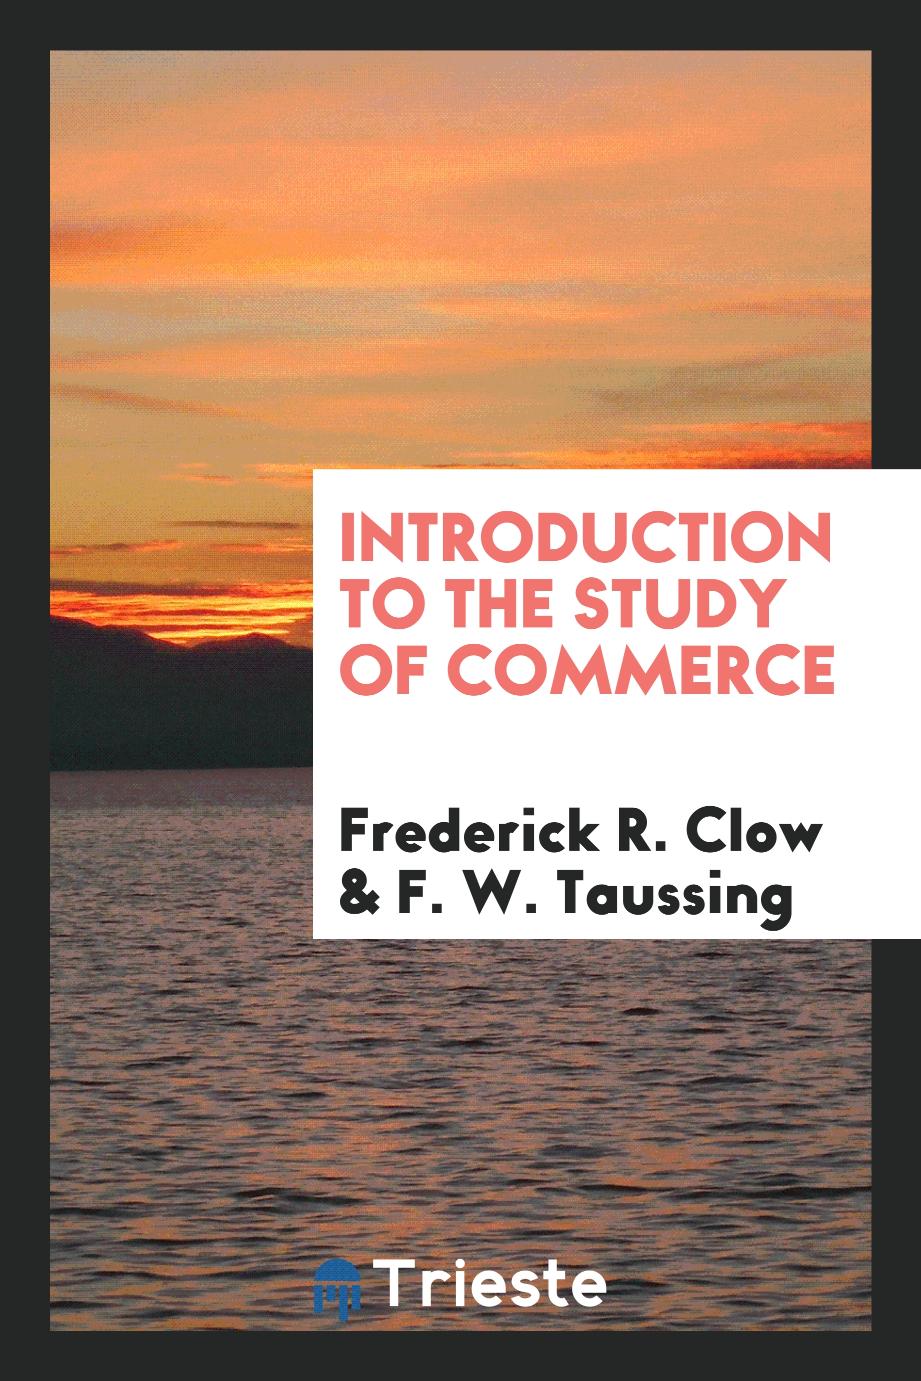 Introduction to the study of commerce